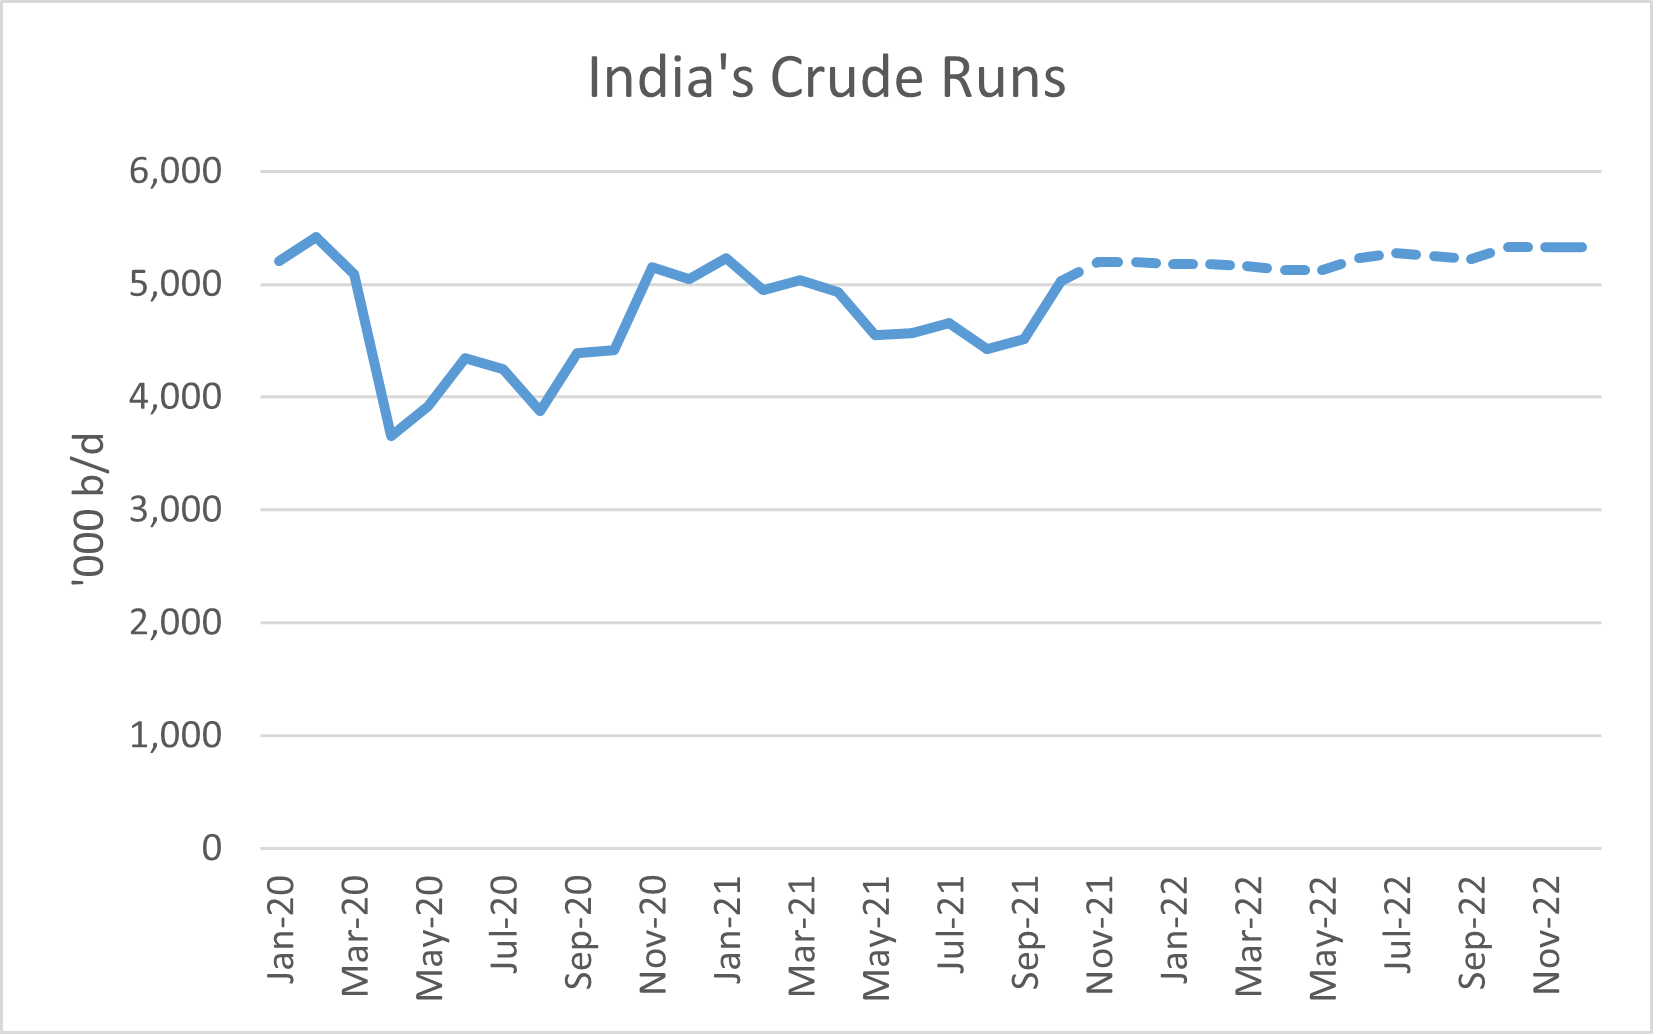 S&P Global Platts Analytics comments on India refineries